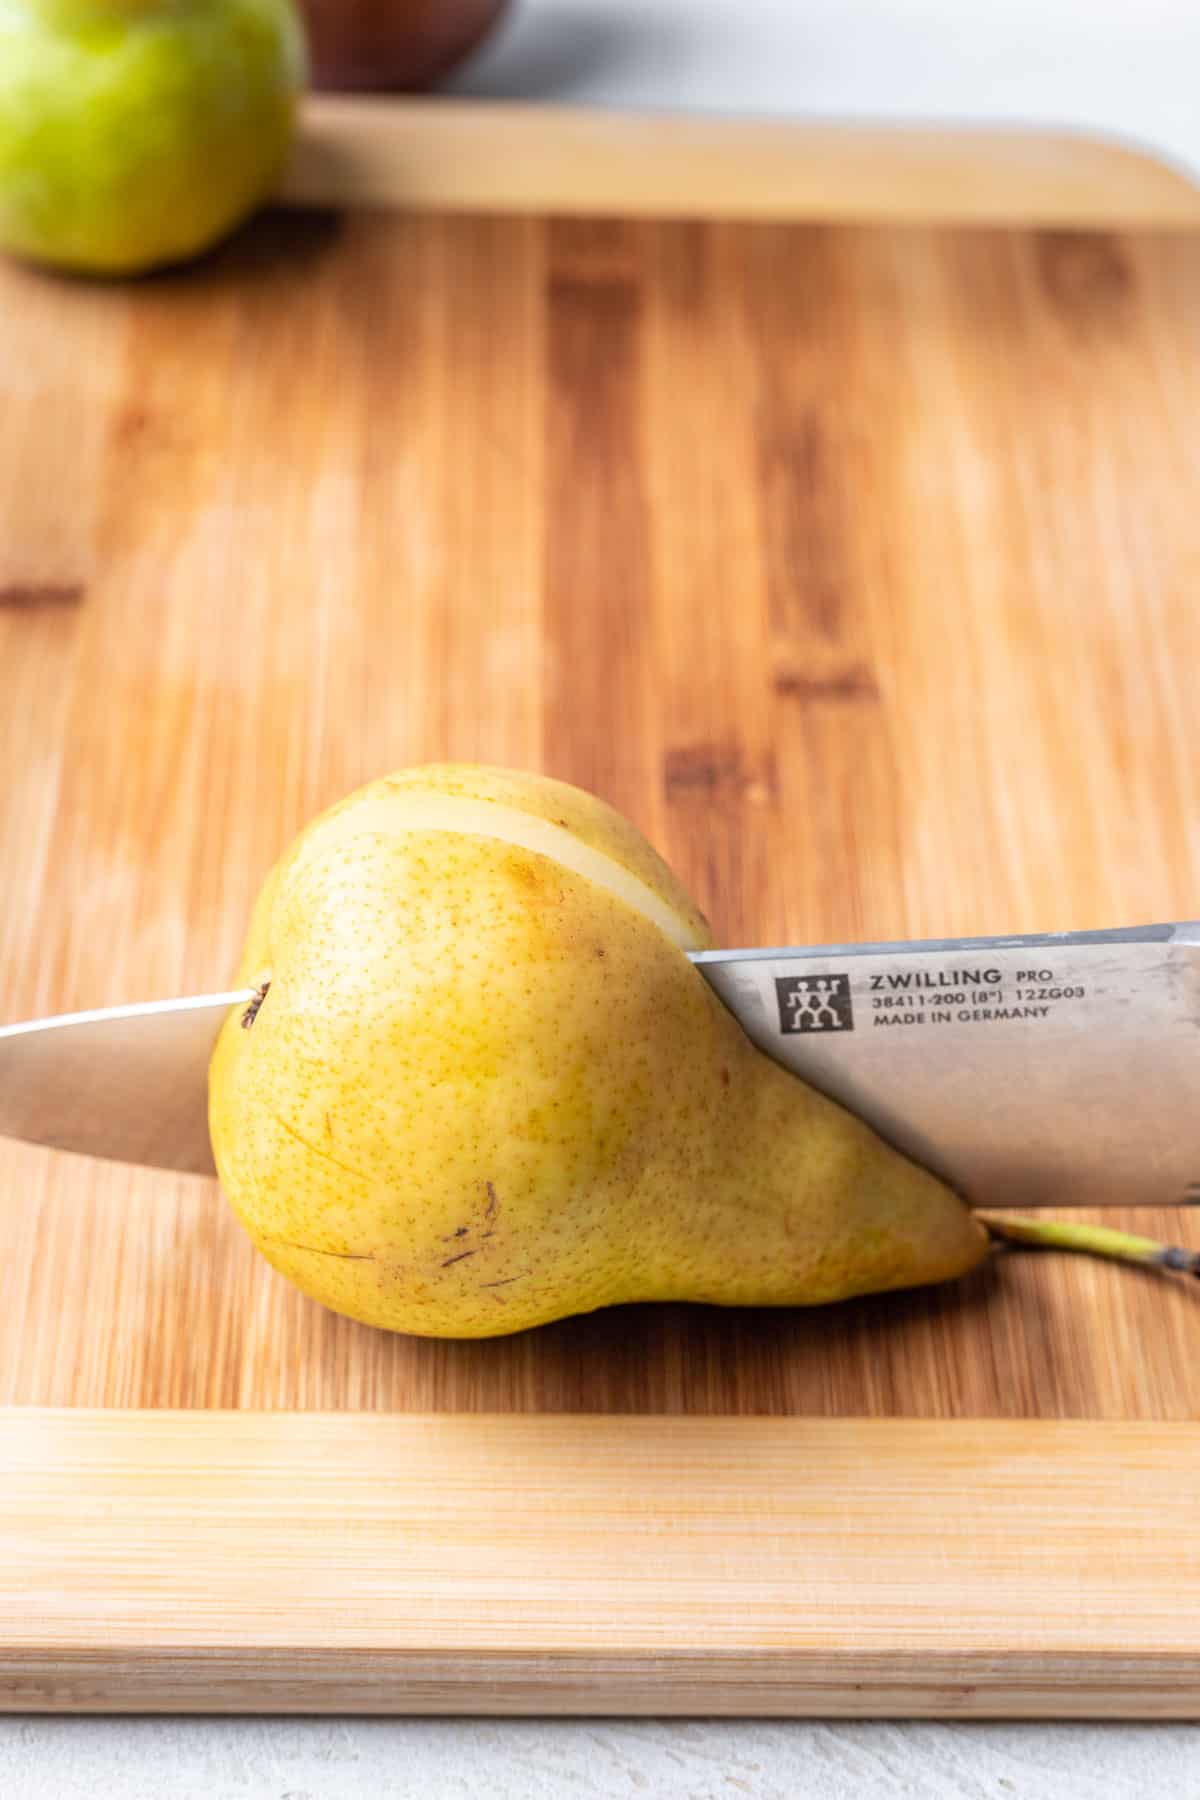 A yellow pear on a wood cutting board, sliced in half with a knife.